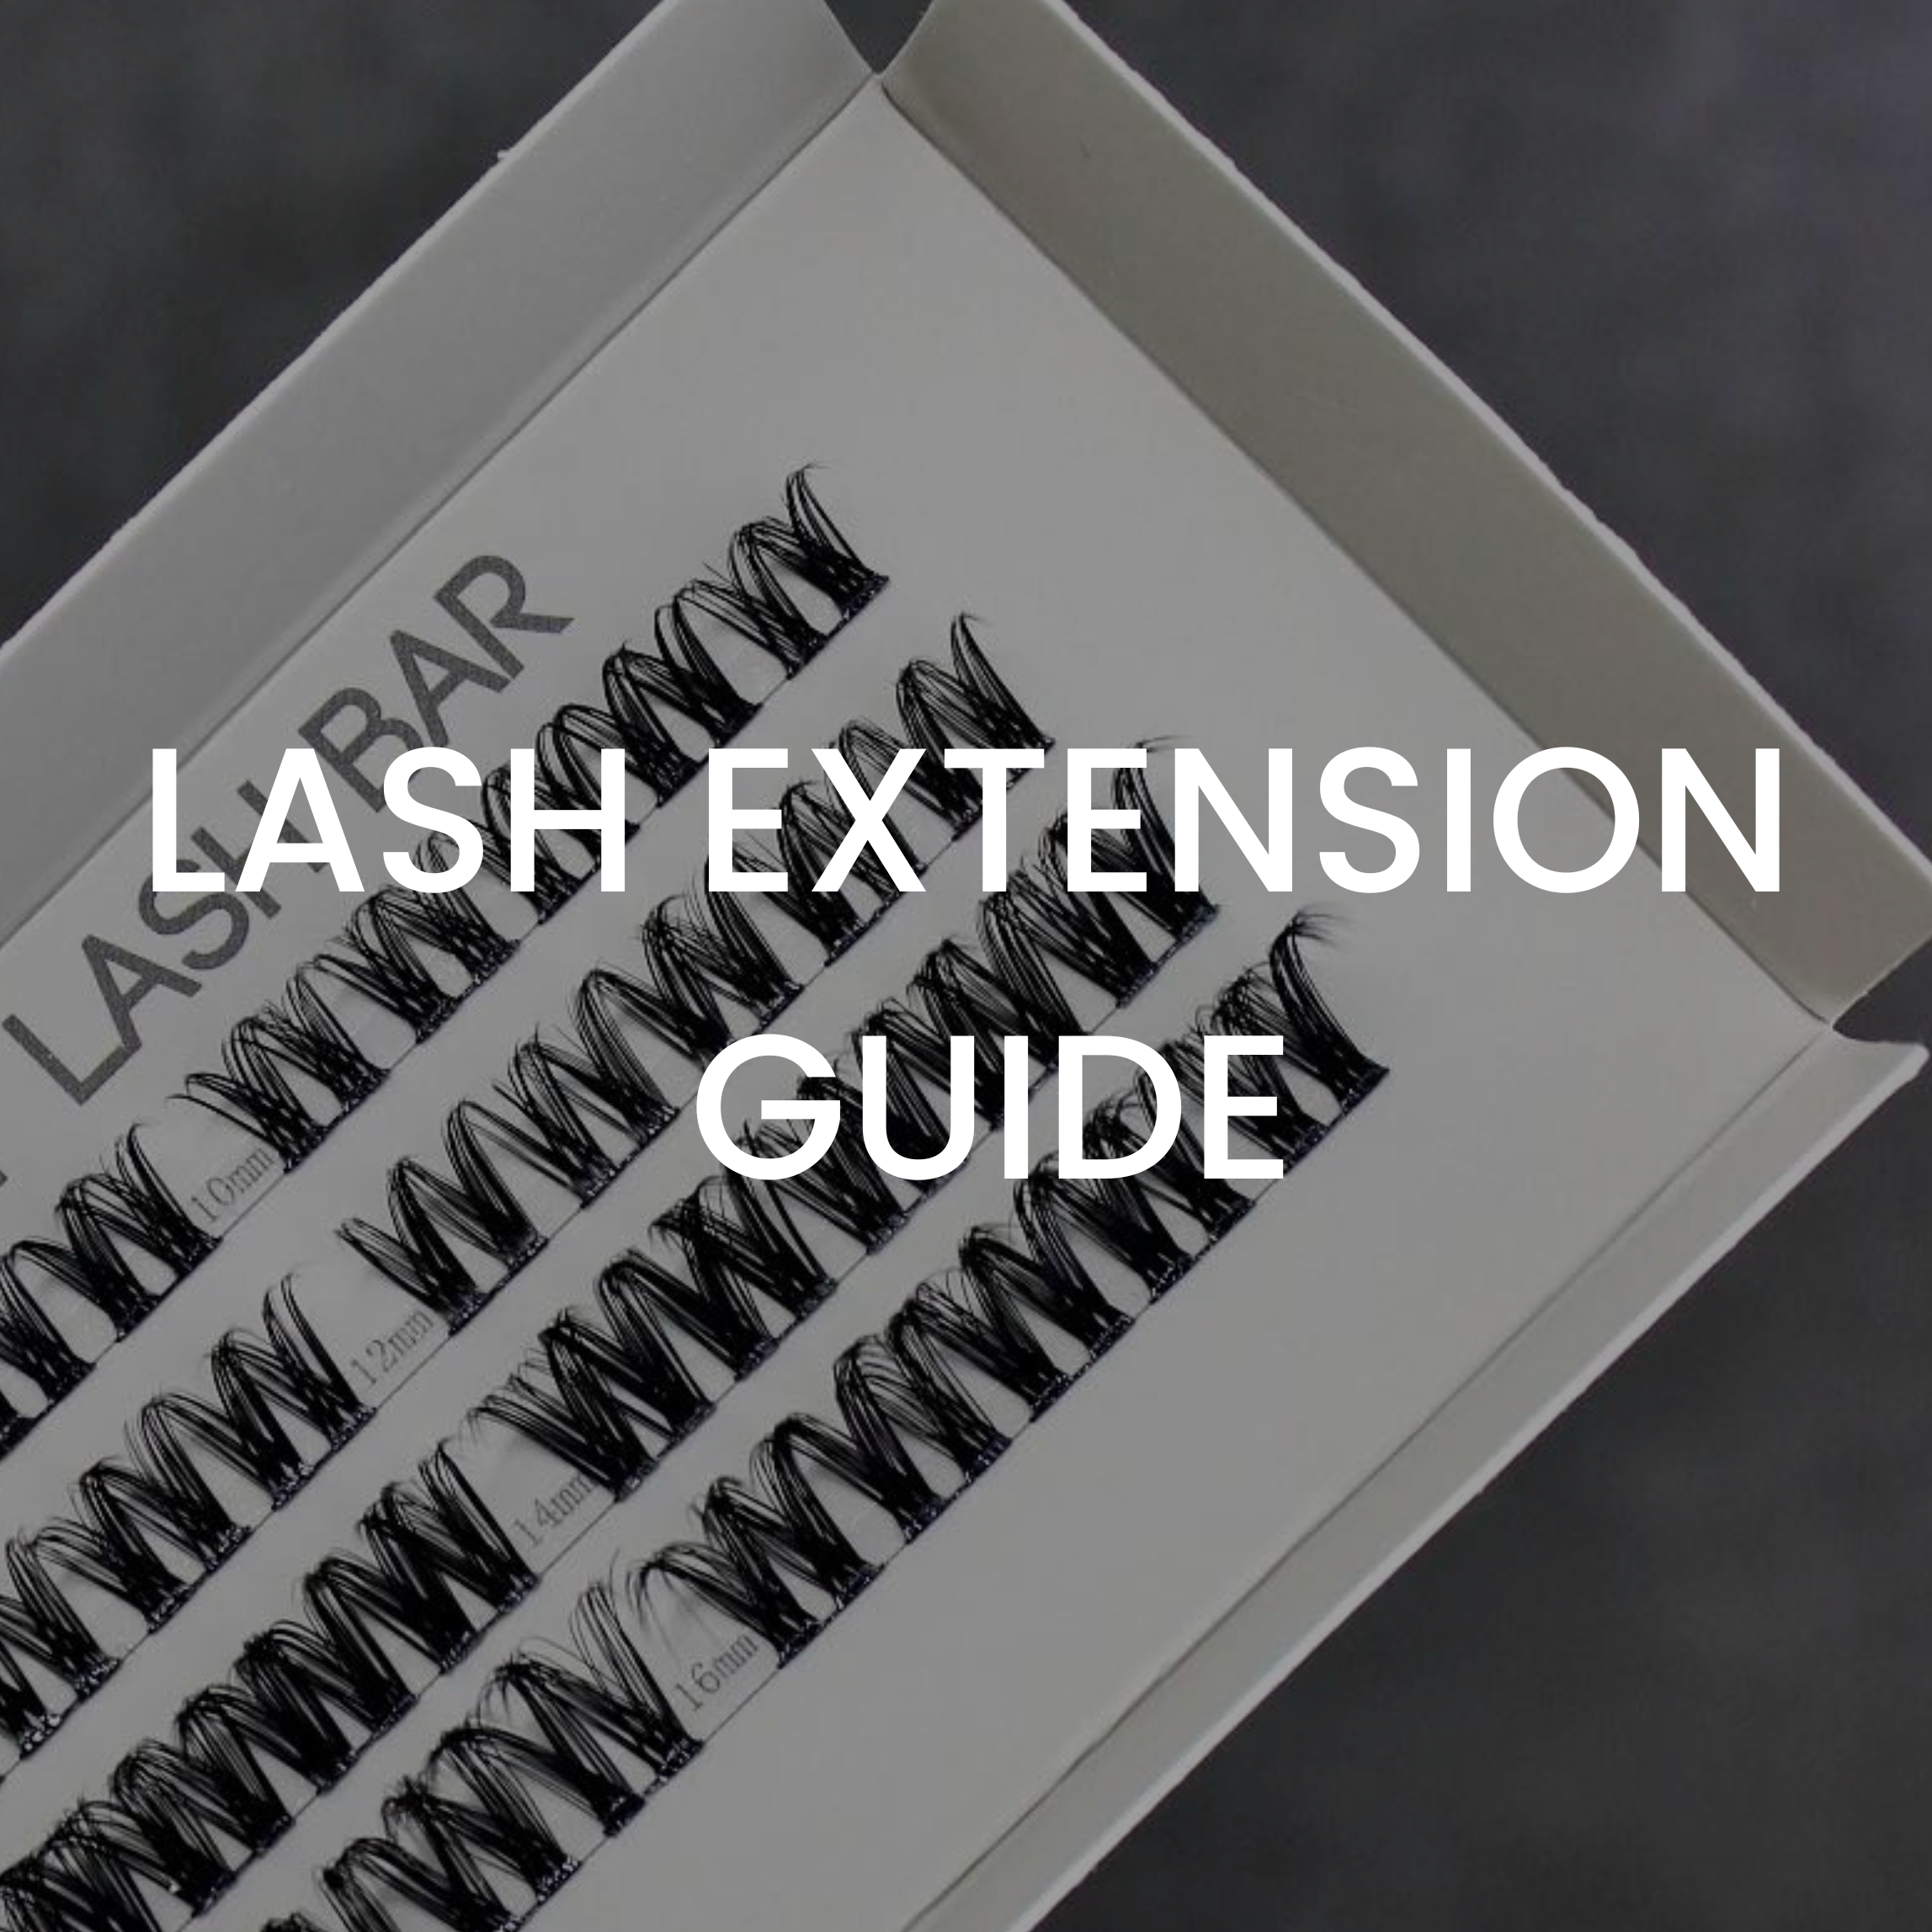 At home lash extensions guide